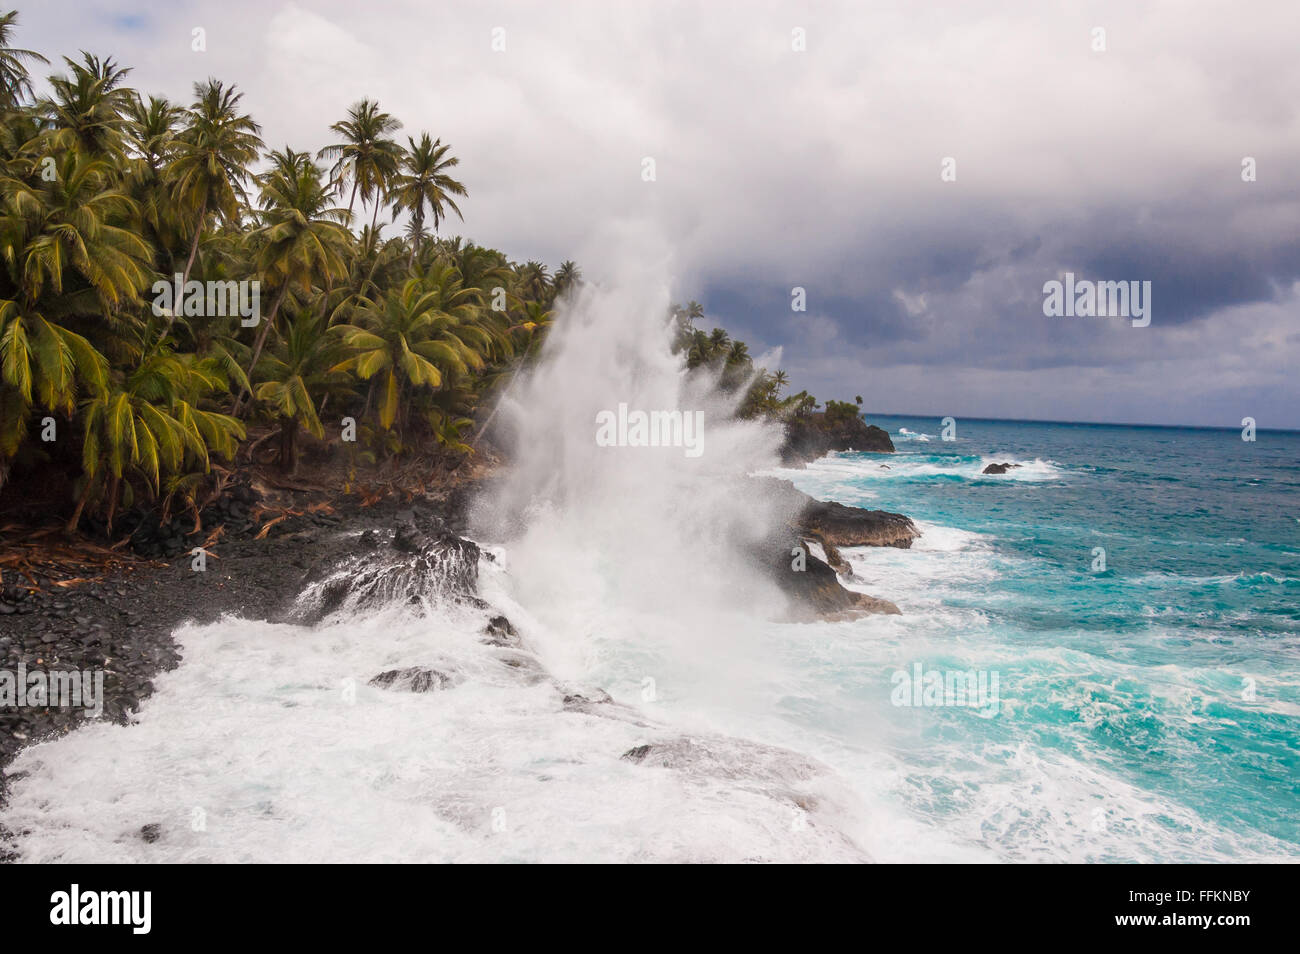 Big waves crushing on the shore of a tropical island with palm trees during a storm. Praia Piscina - Sao Tomè and Principe. Stock Photo